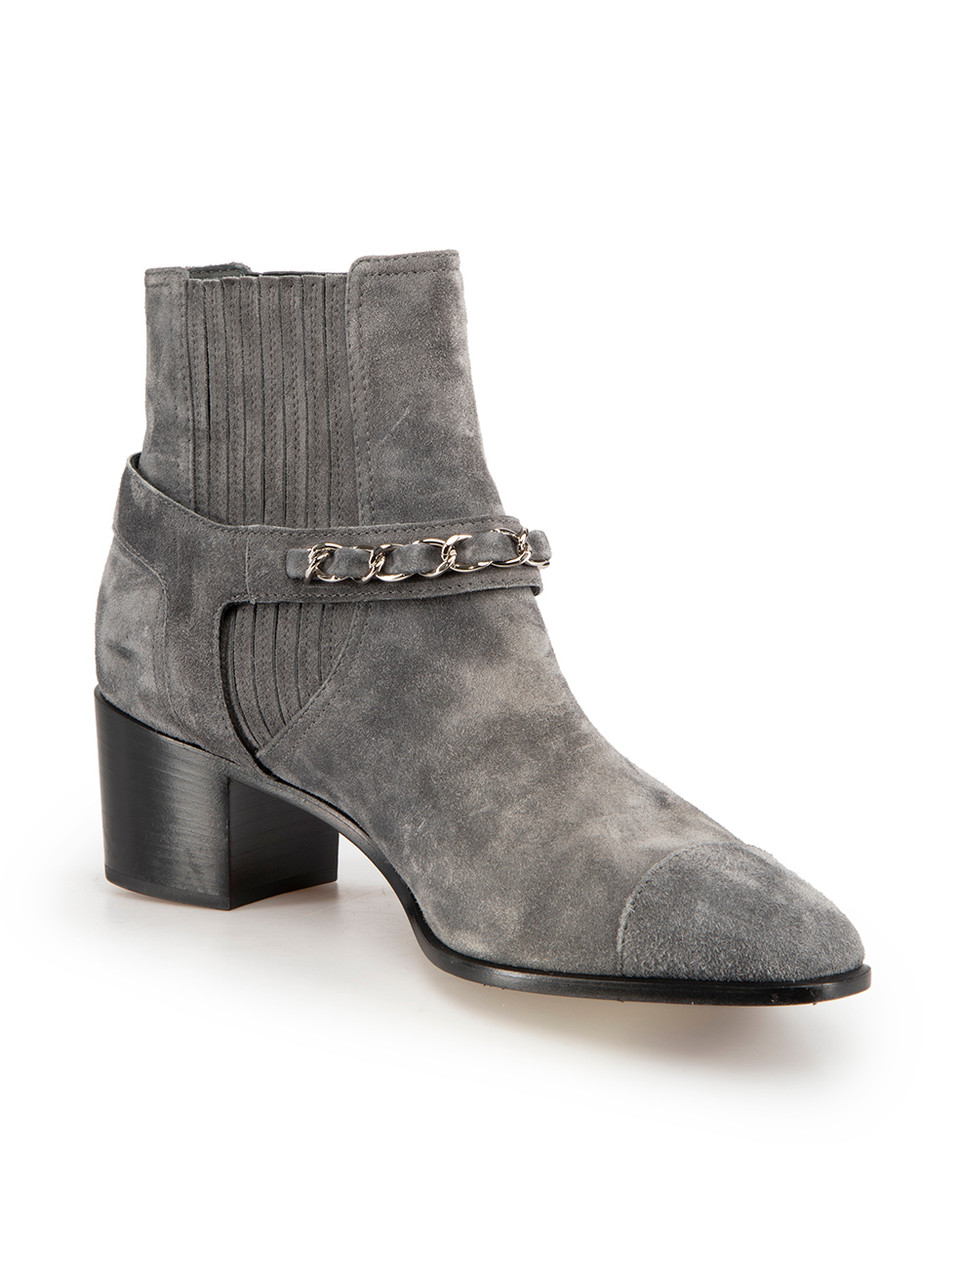 Chanel Grey Suede Chain Detail Ankle Boots